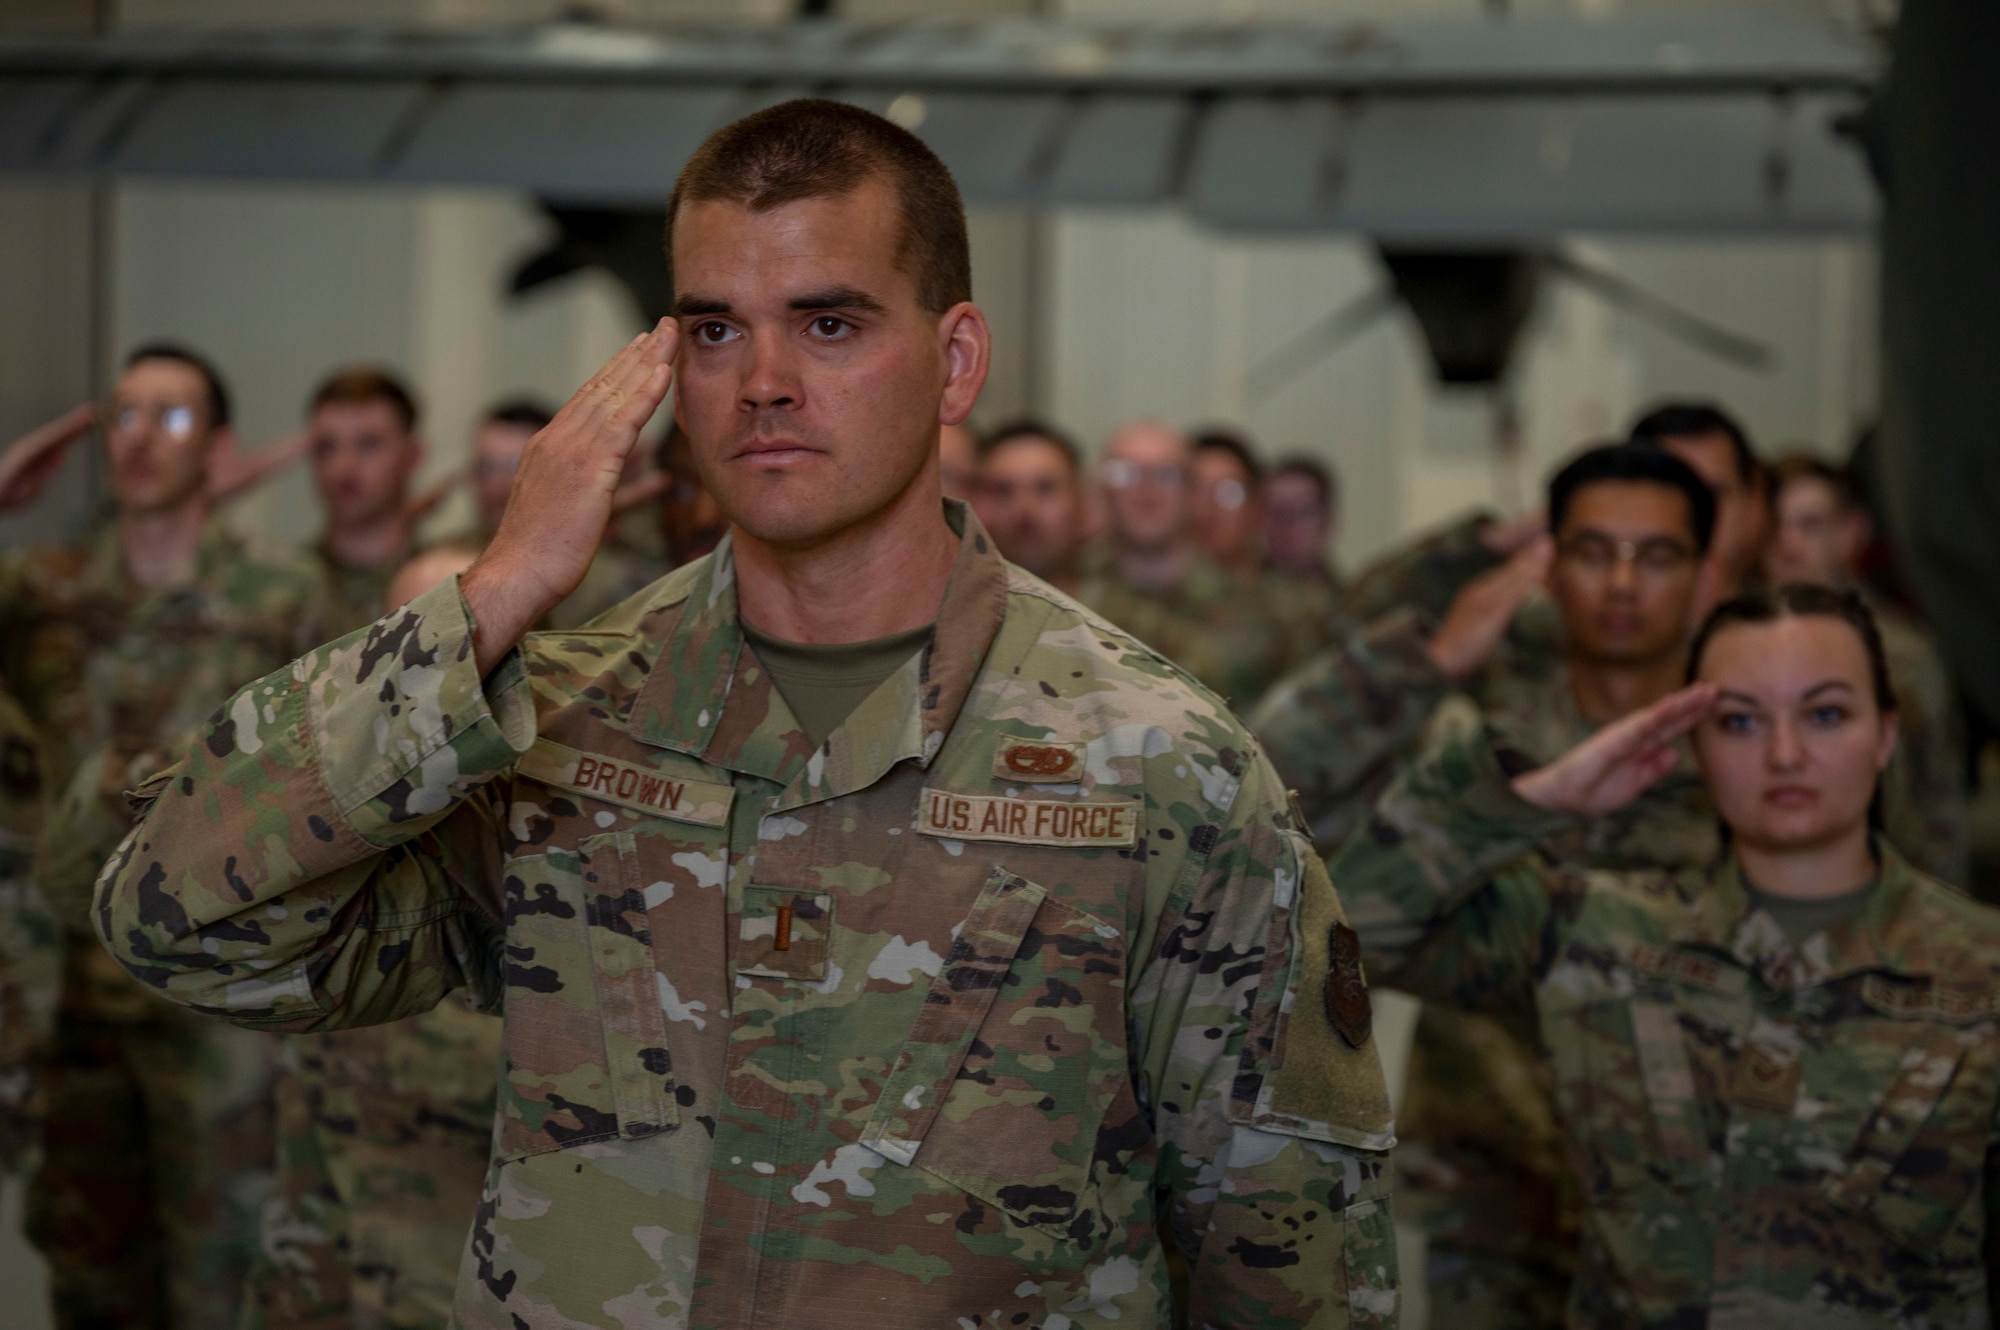 2nd Lt. Christopher Brown, 317th Maintenance Squadron maintenance officer, renders the final salute to Maj. Andrew Brock as the 317th MXS commander during a change of command ceremony at Dyess Air Force Base, Texas, 17 Jun 2022. Changes of command in the military are a tradition that formally represent the transfer of authority from one leader to another. (U.S. Air Force photo by Senior Airman Reilly McGuire)